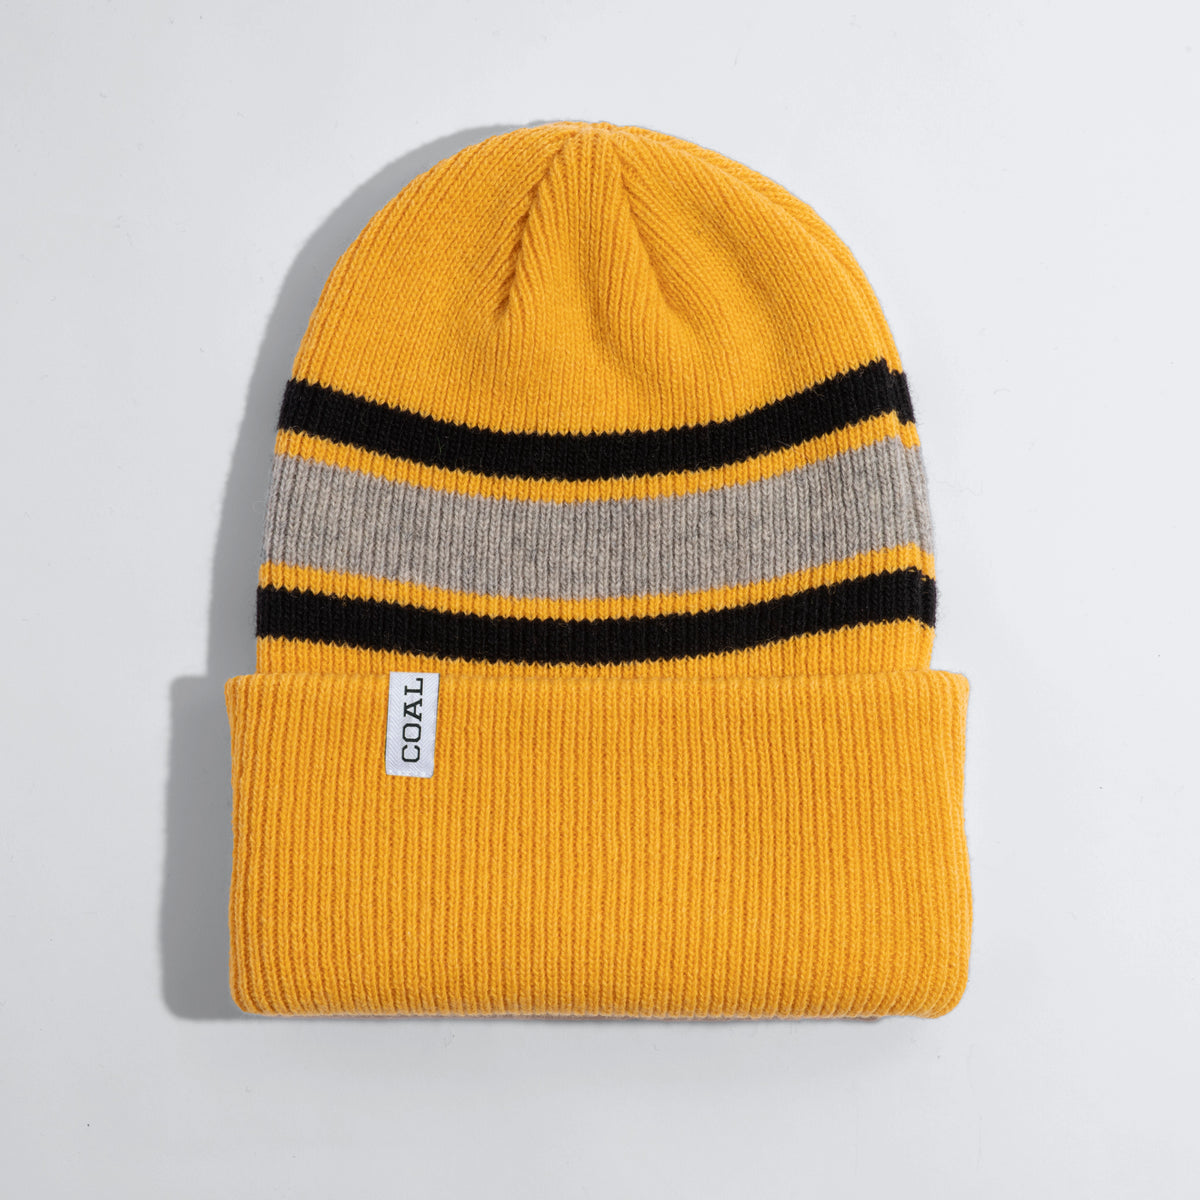 Beanies | Coal Headwear - Crafted For Adventure Seekers